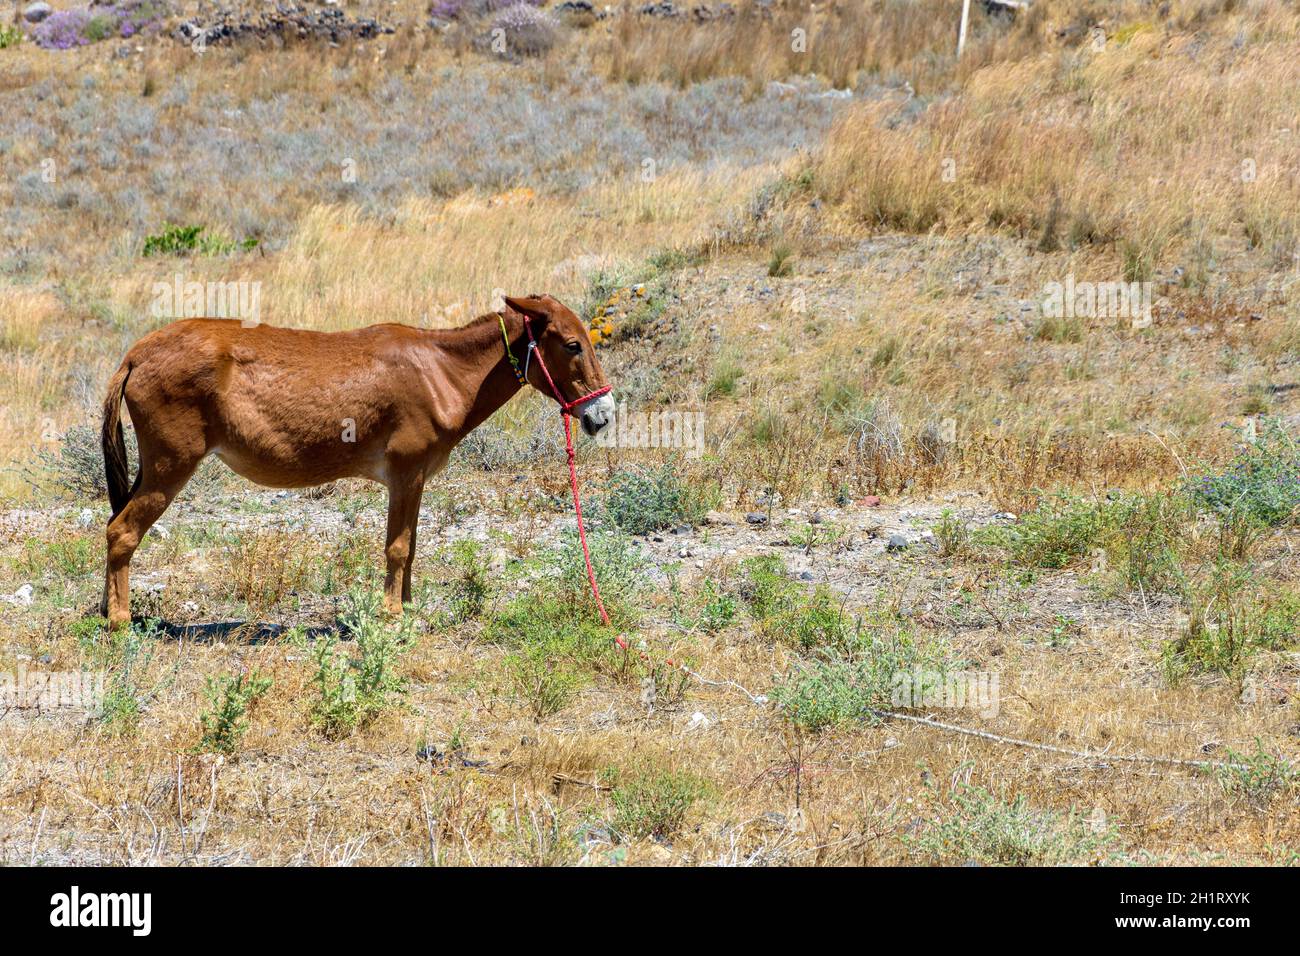 Brown donkey resting tied in a field, Greece Stock Photo